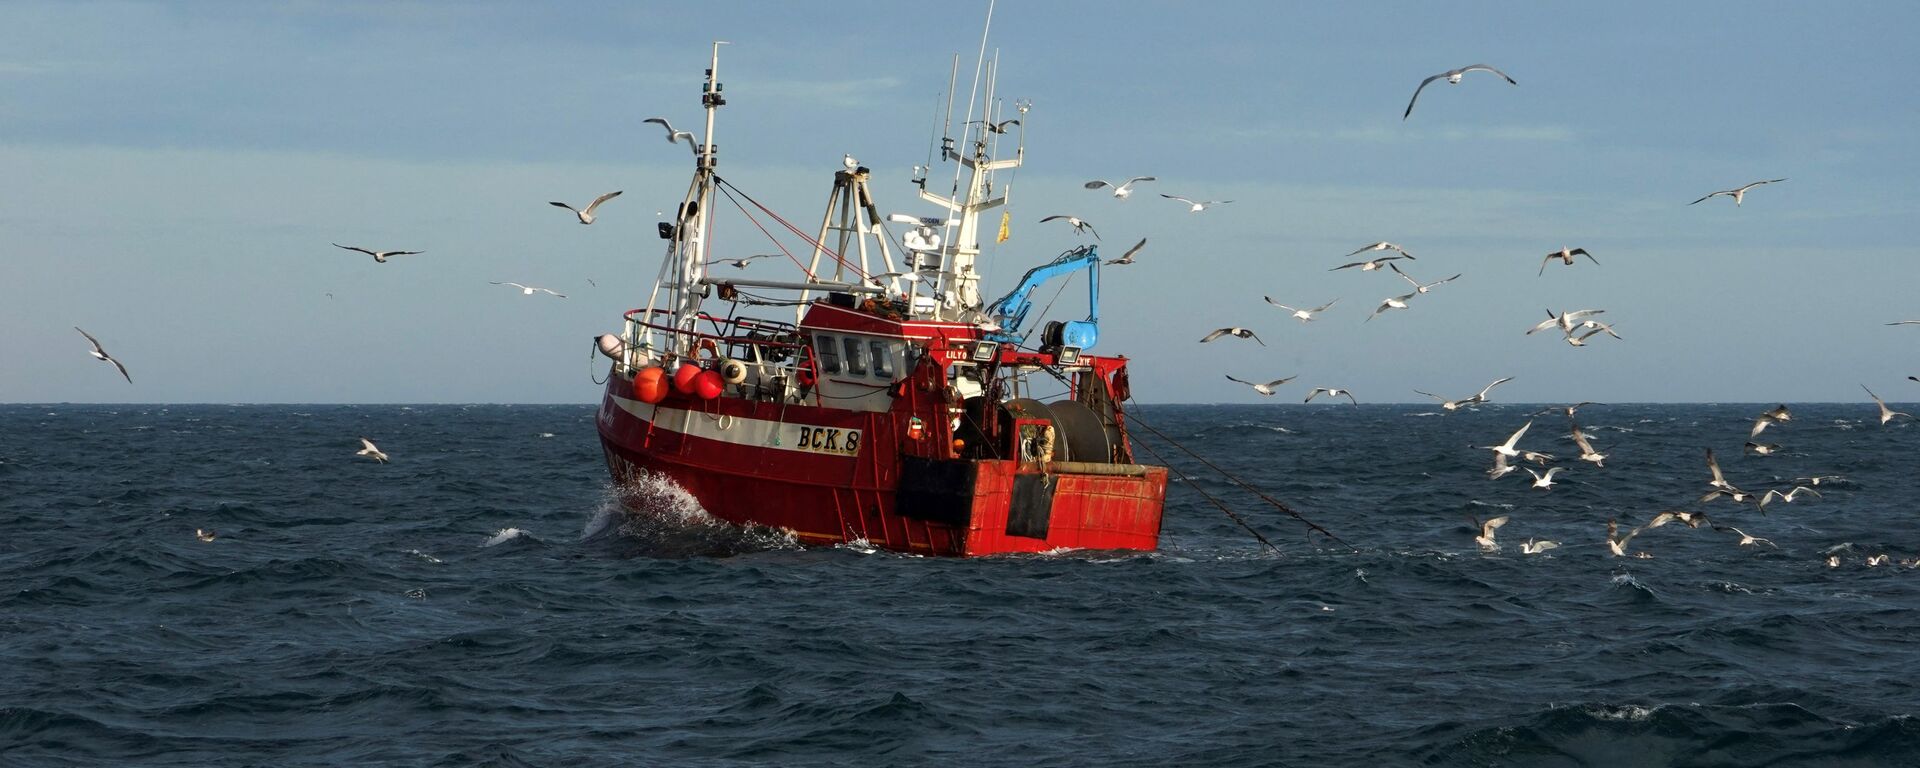 Guls surround a fishing trawler as it works in the North Sea, off the coast of North Shields, in northeast England on January 21, 2020 - Sputnik International, 1920, 07.11.2022